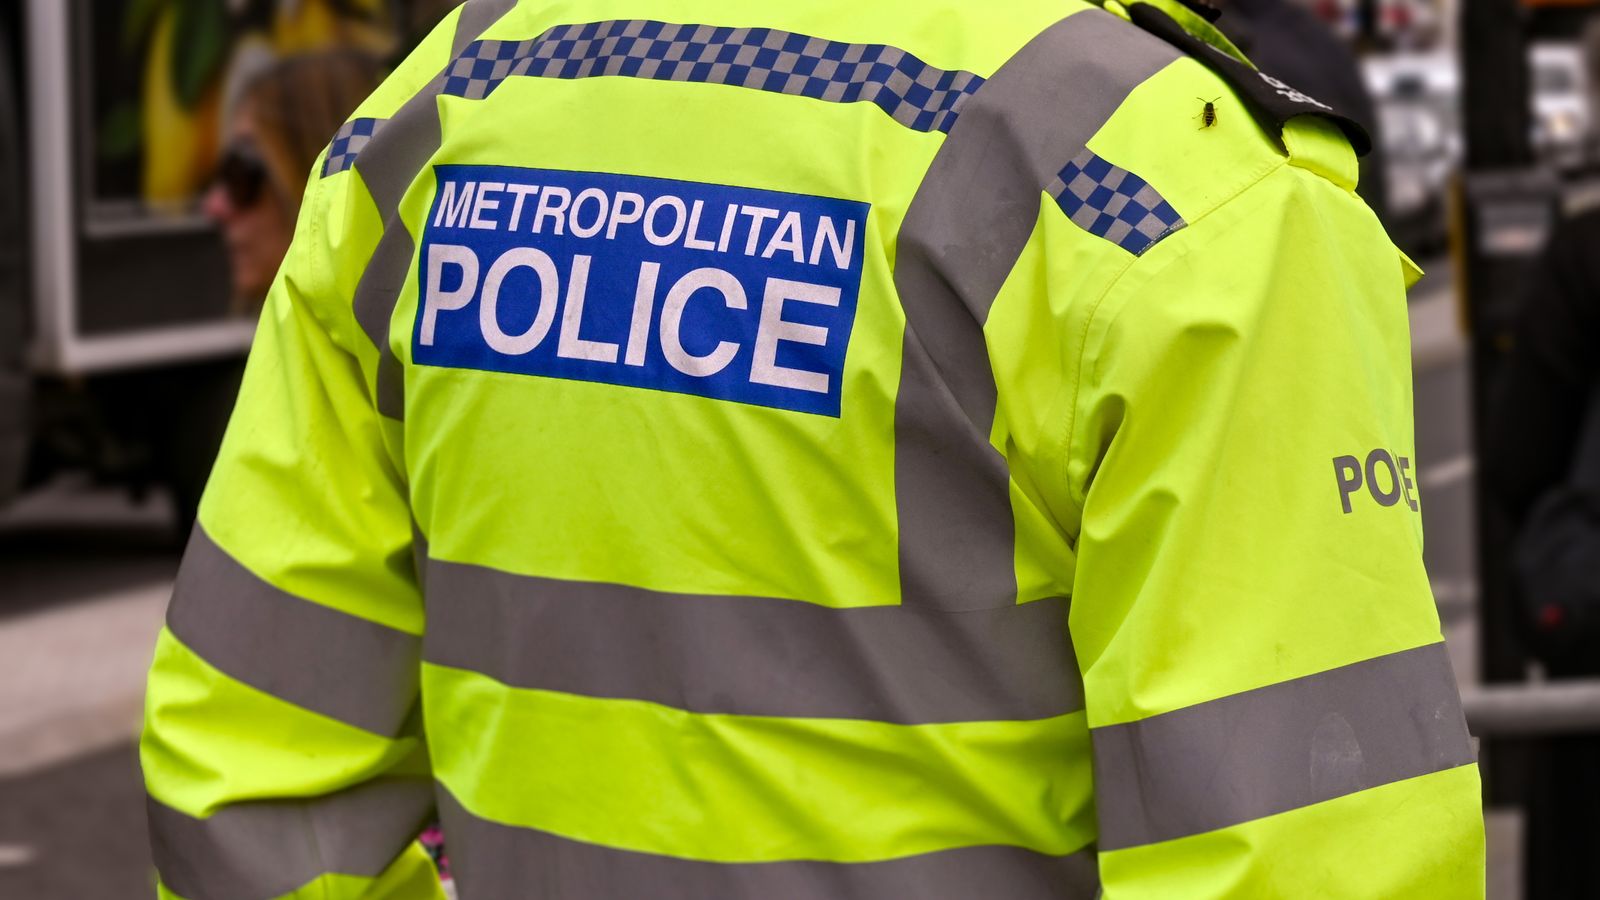 Met Police admits details of officers at risk of exposure after warrant card supplier was hacked